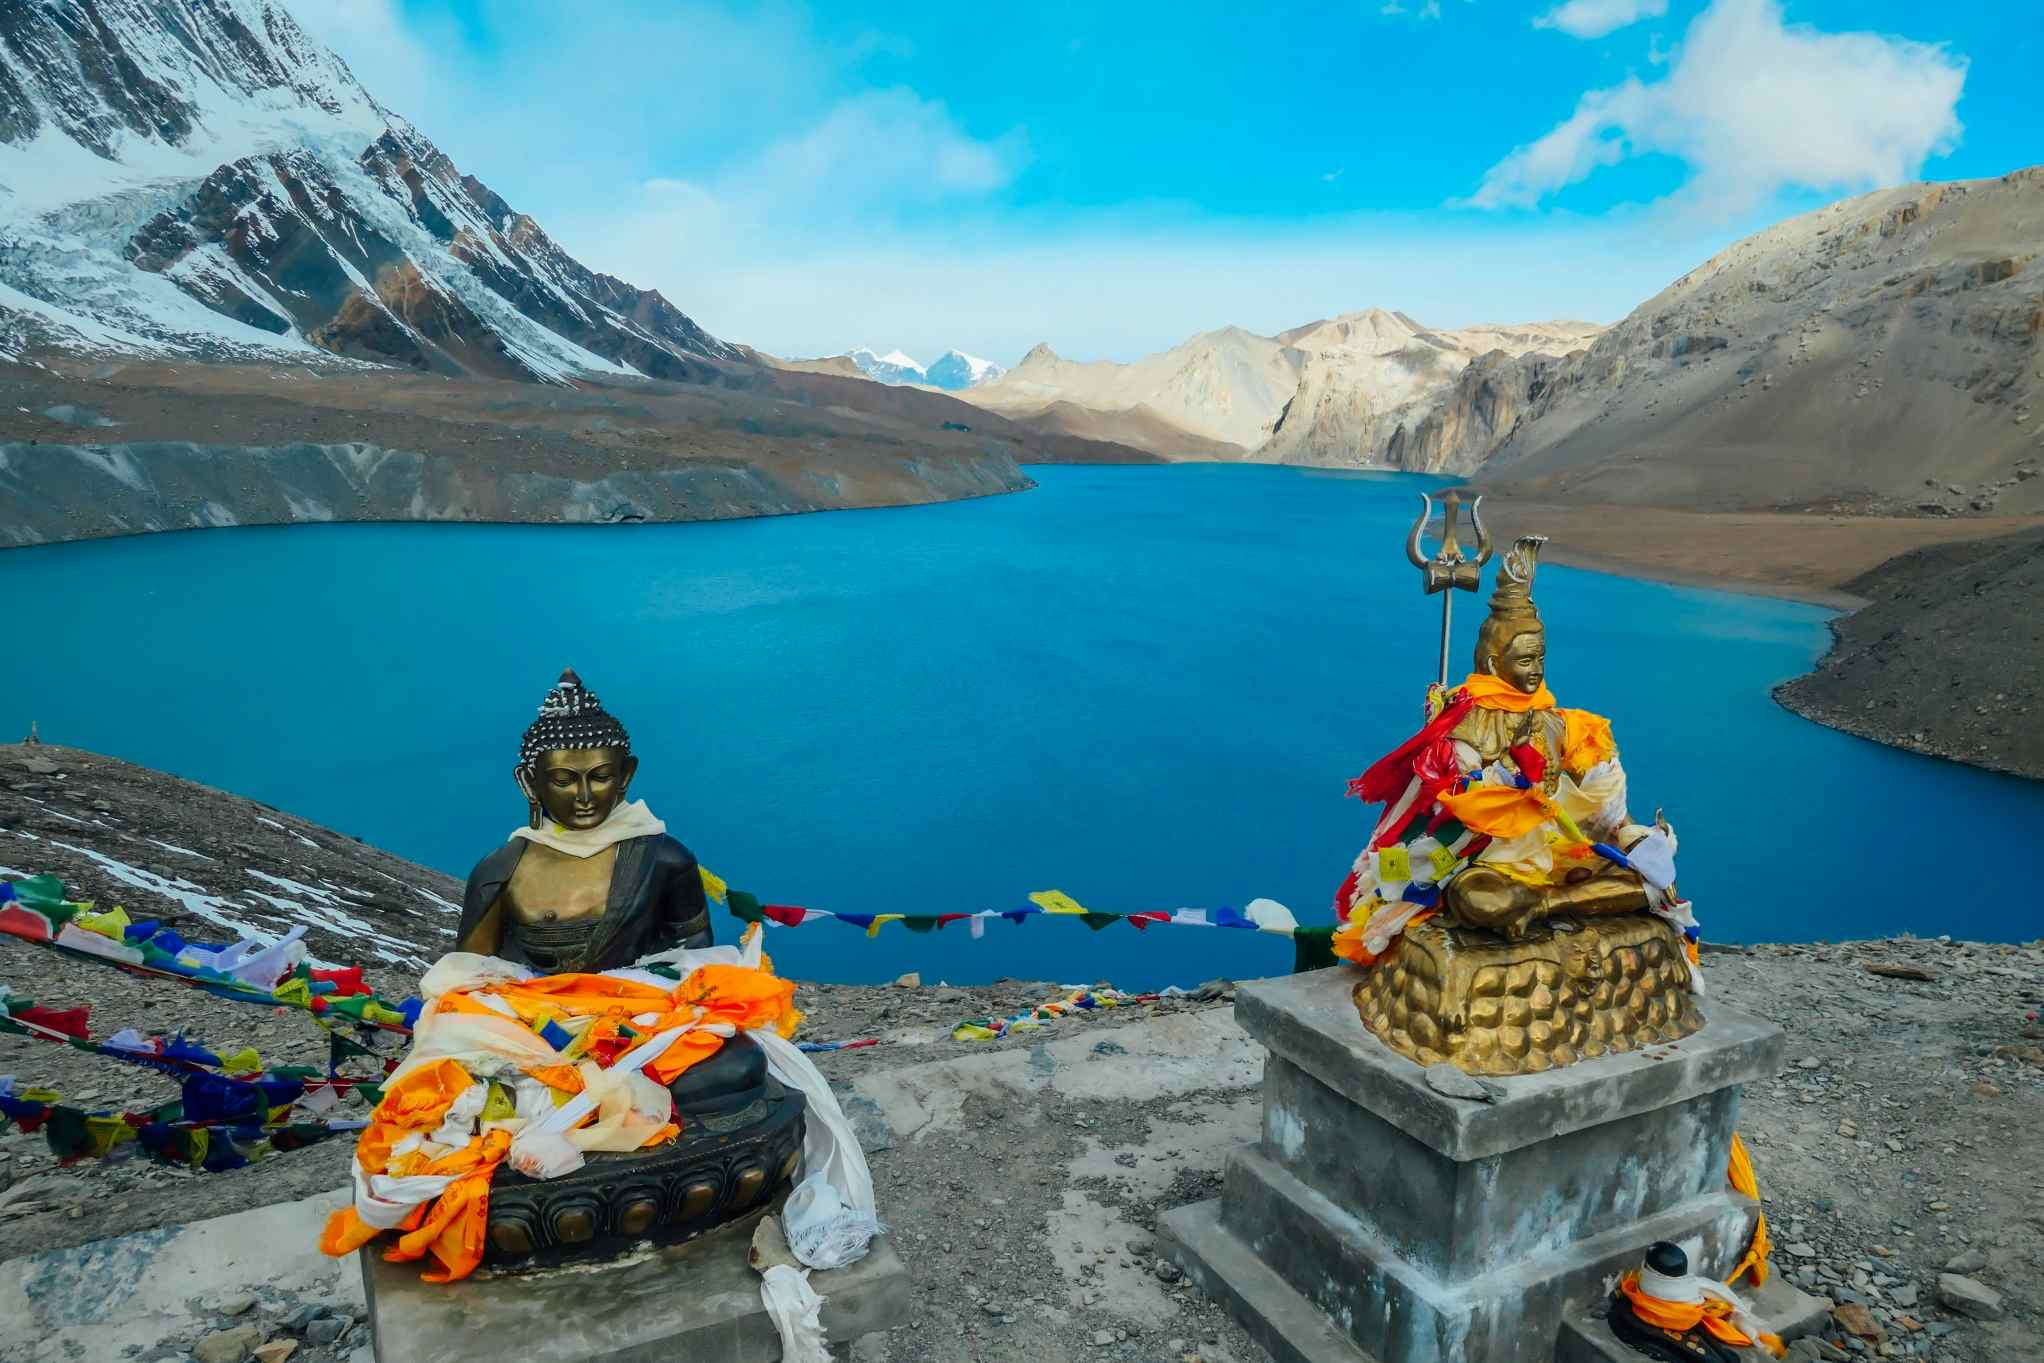 Two Buddha statues at Tilicho Lake, covered with prayer flags, backed by a blue lake and mountains on the Annapurna Circuit Trek, Nepal.